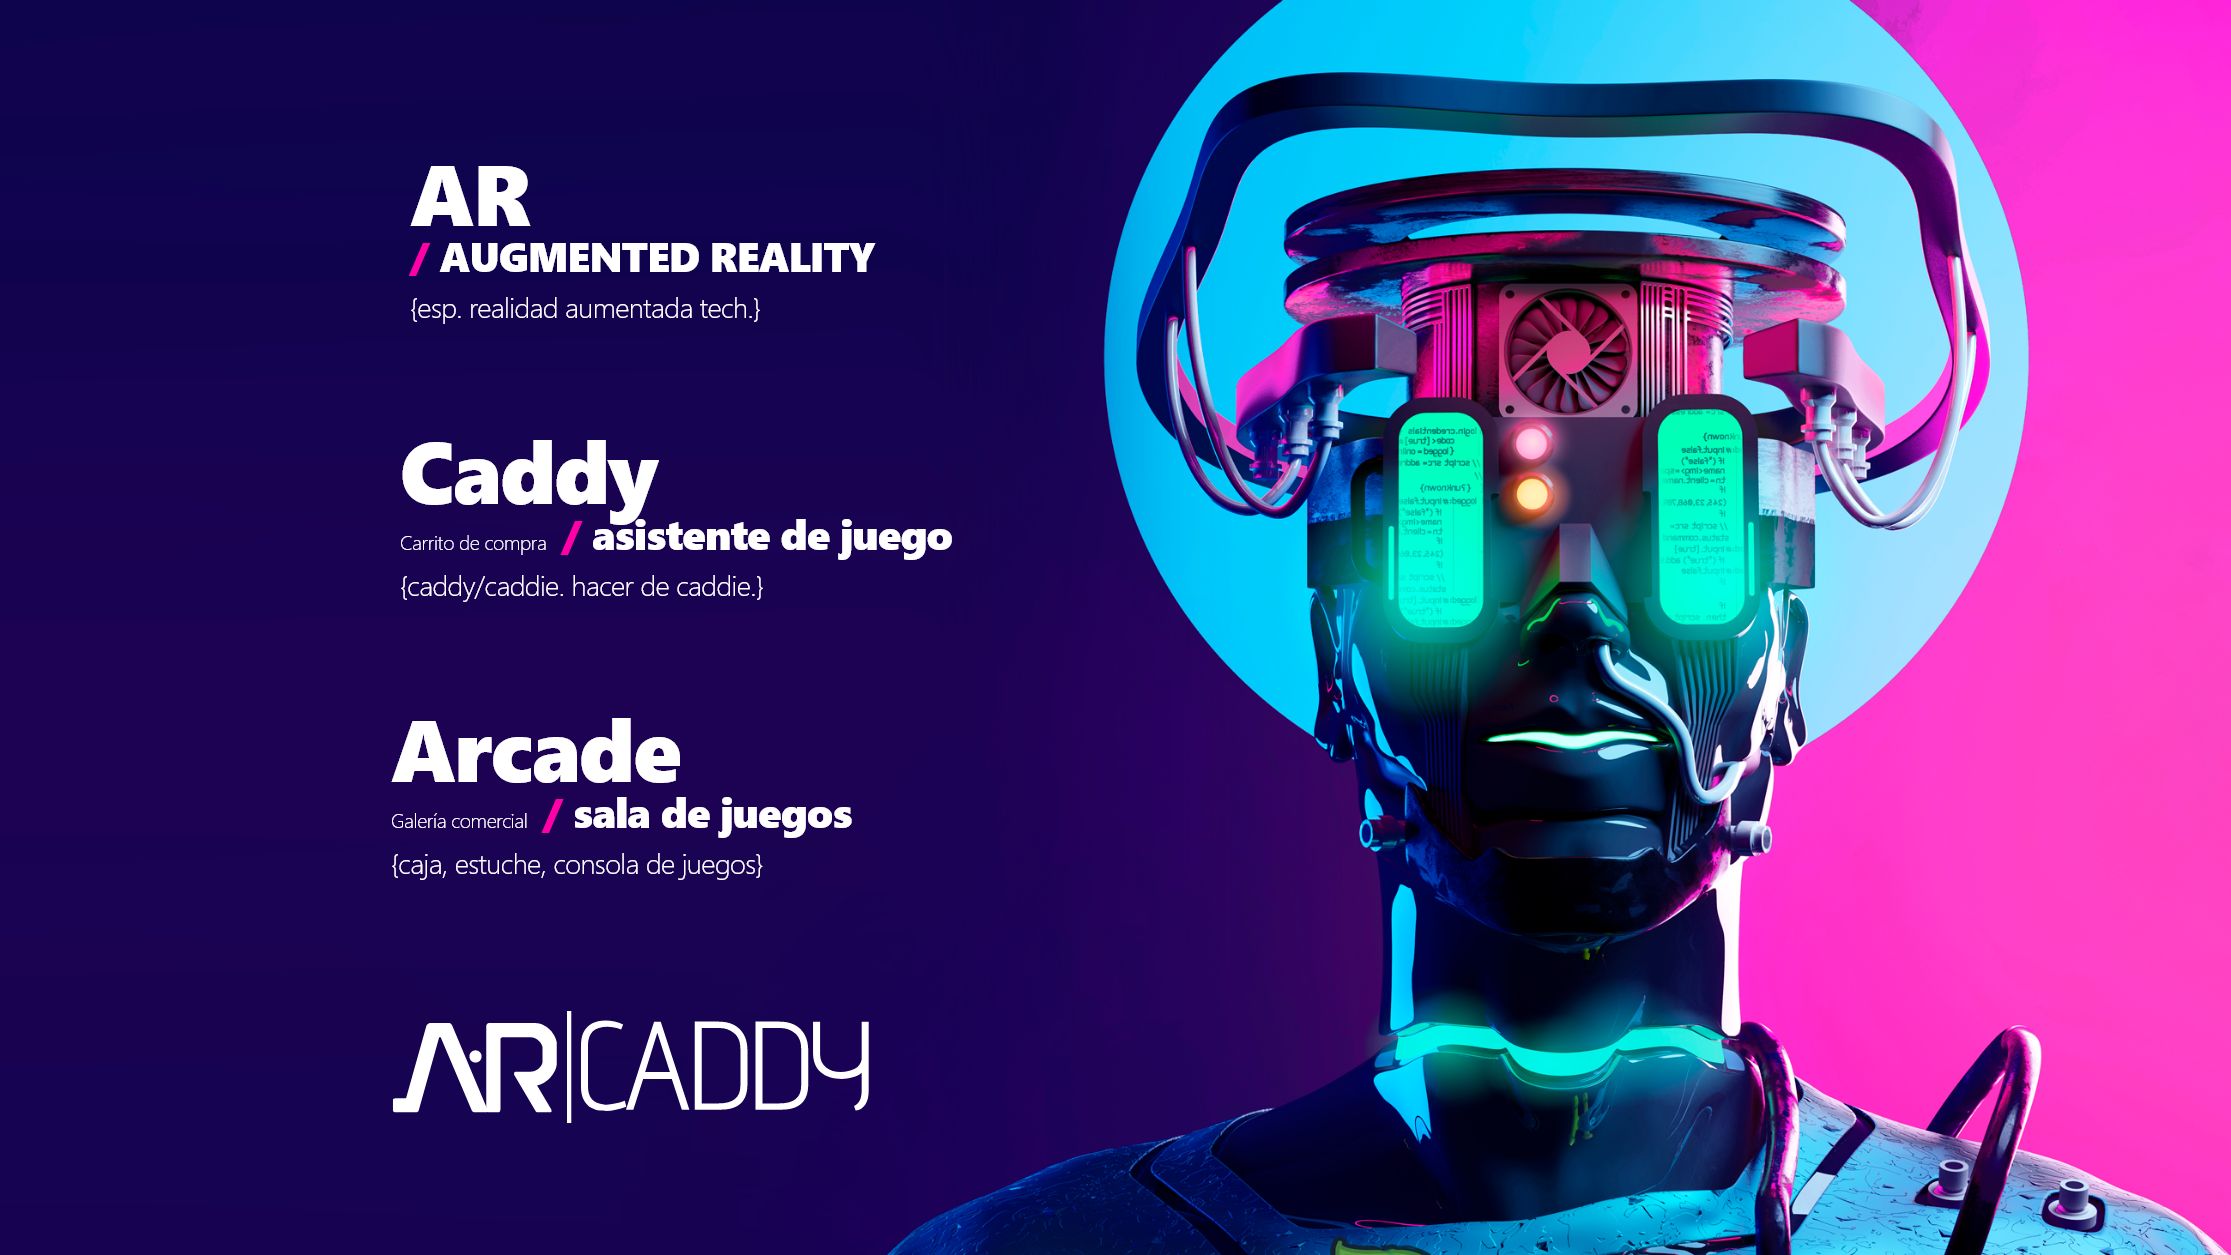 AR|CADDY - AUGMENTED REALITY